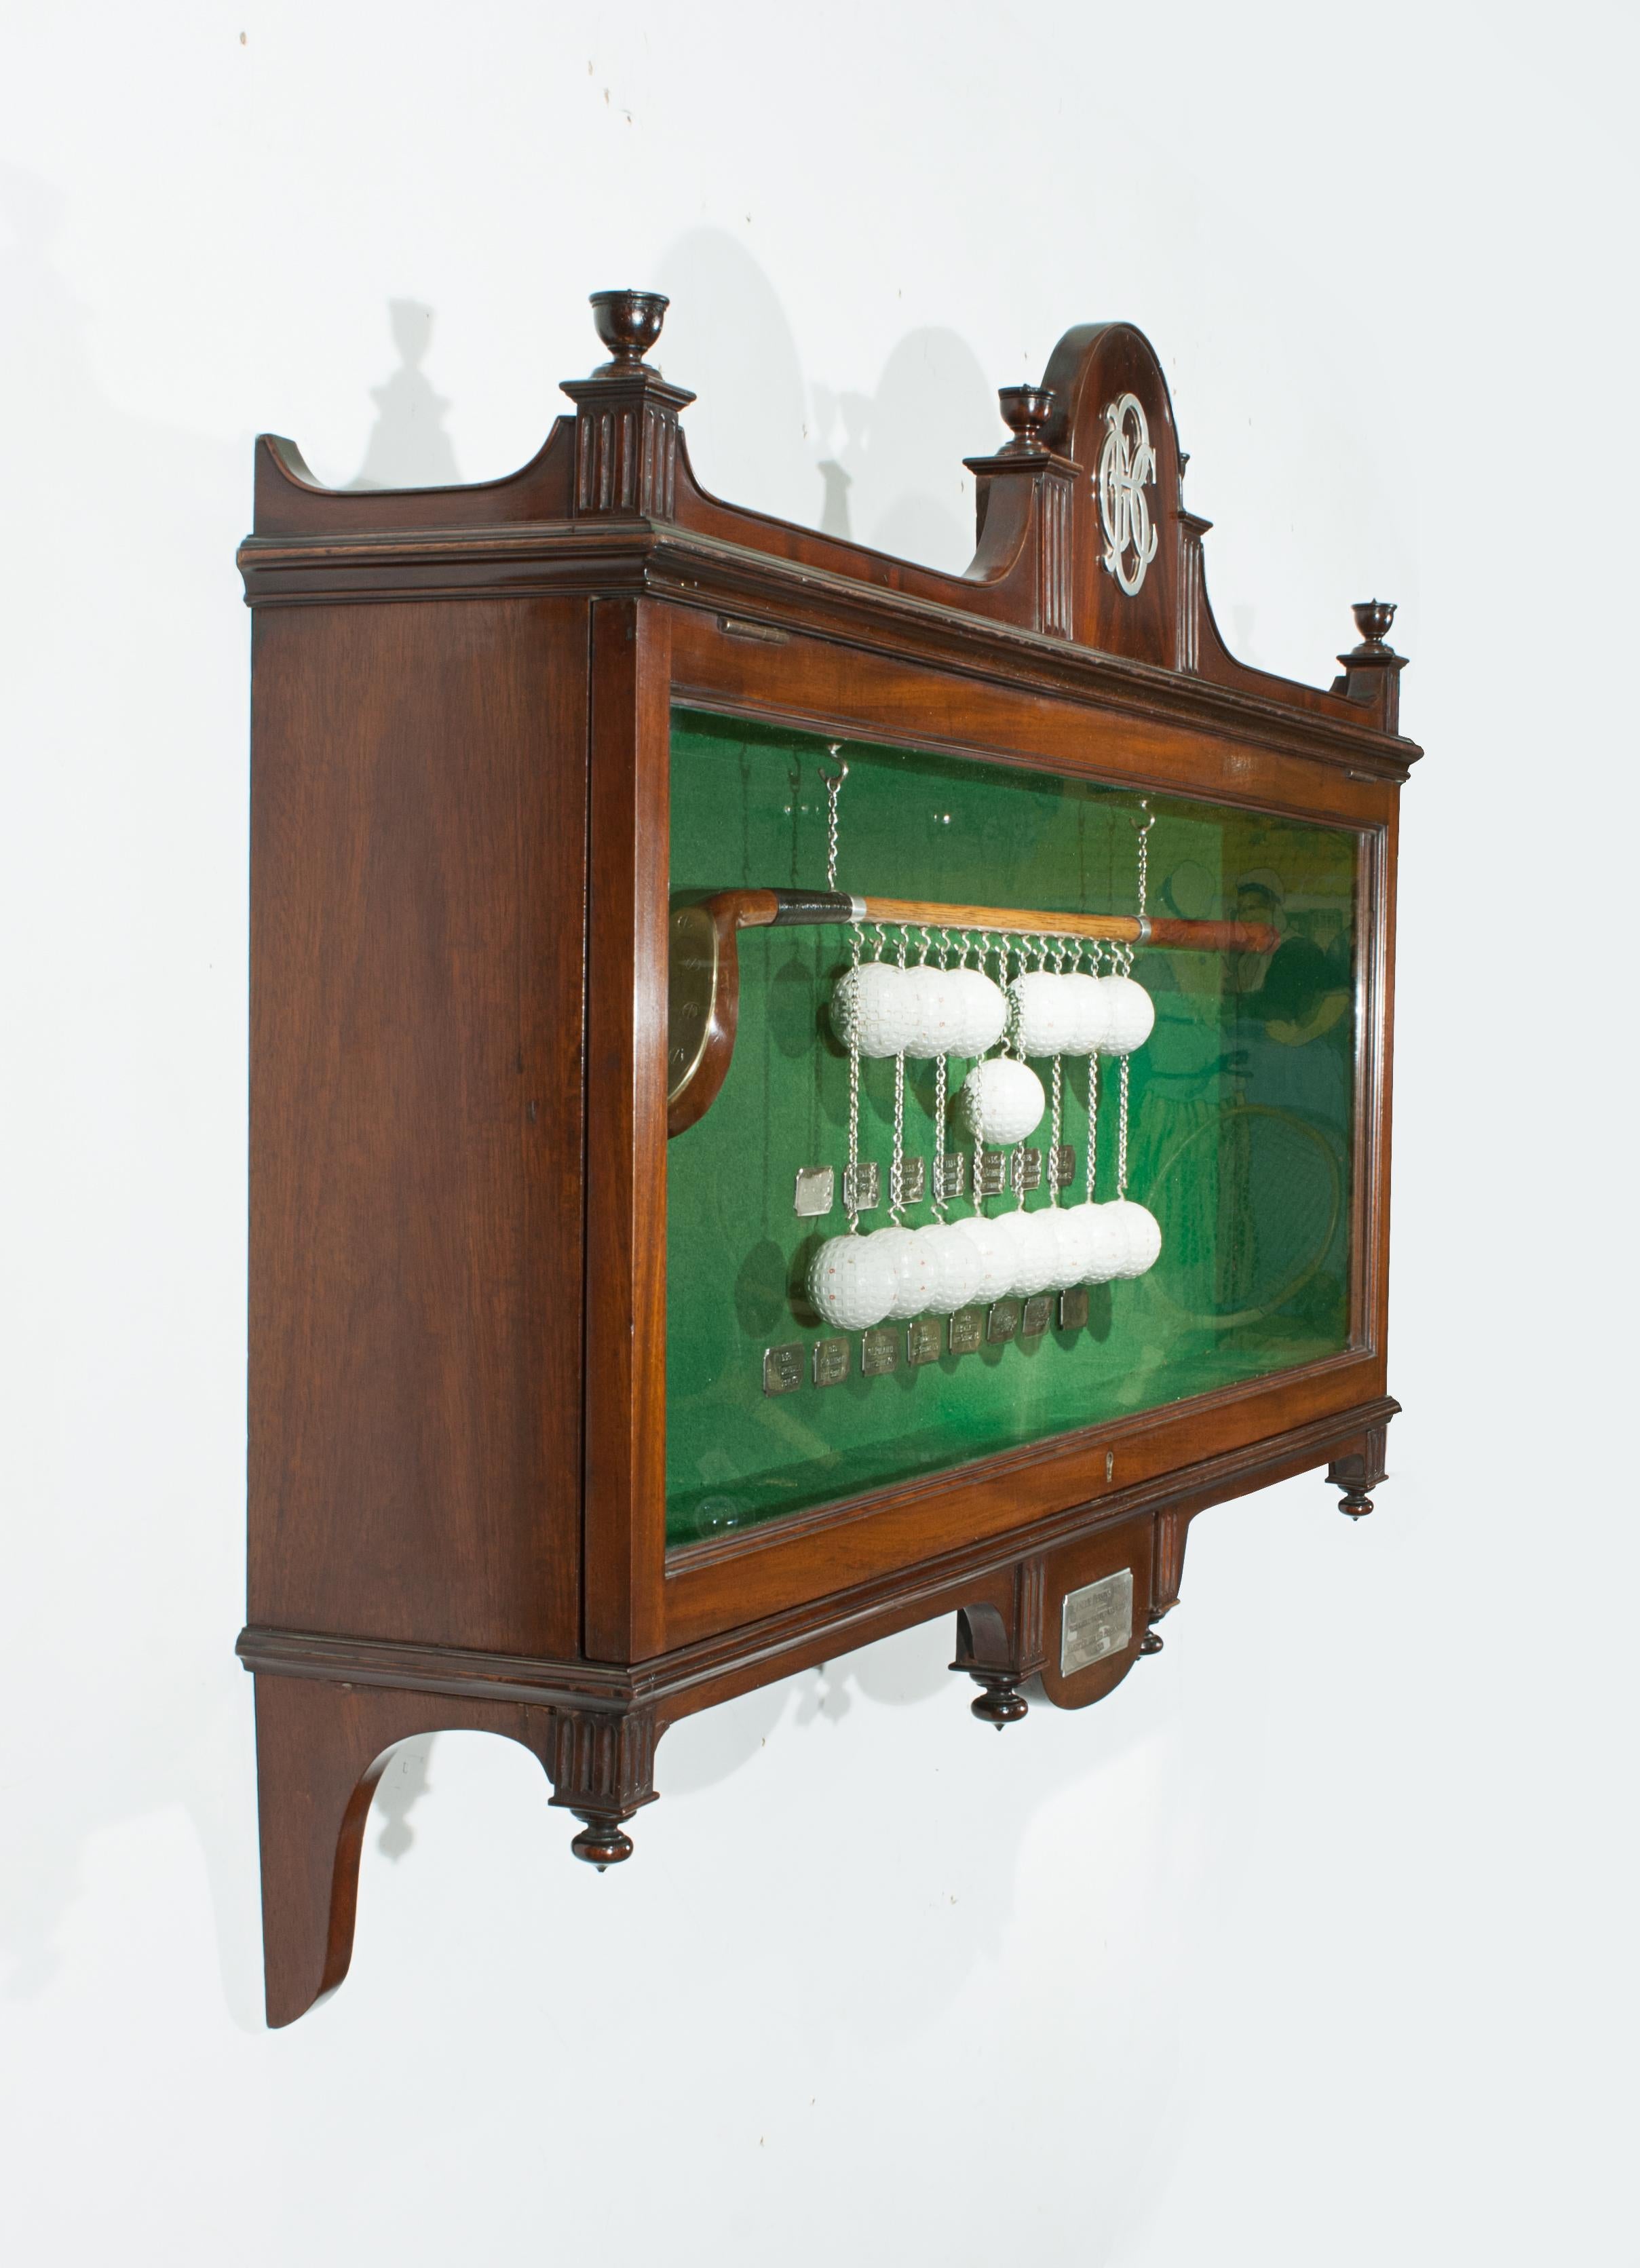 Beckenham Golf Club trophy cabinet.
An early 20th century wall-mounted trophy display case made for Beckenham Golf Club by their professional Harry Brown. The cabinet bears a silver-plate monogram of 'BGC' for Beckenham Golf Club. There is a model